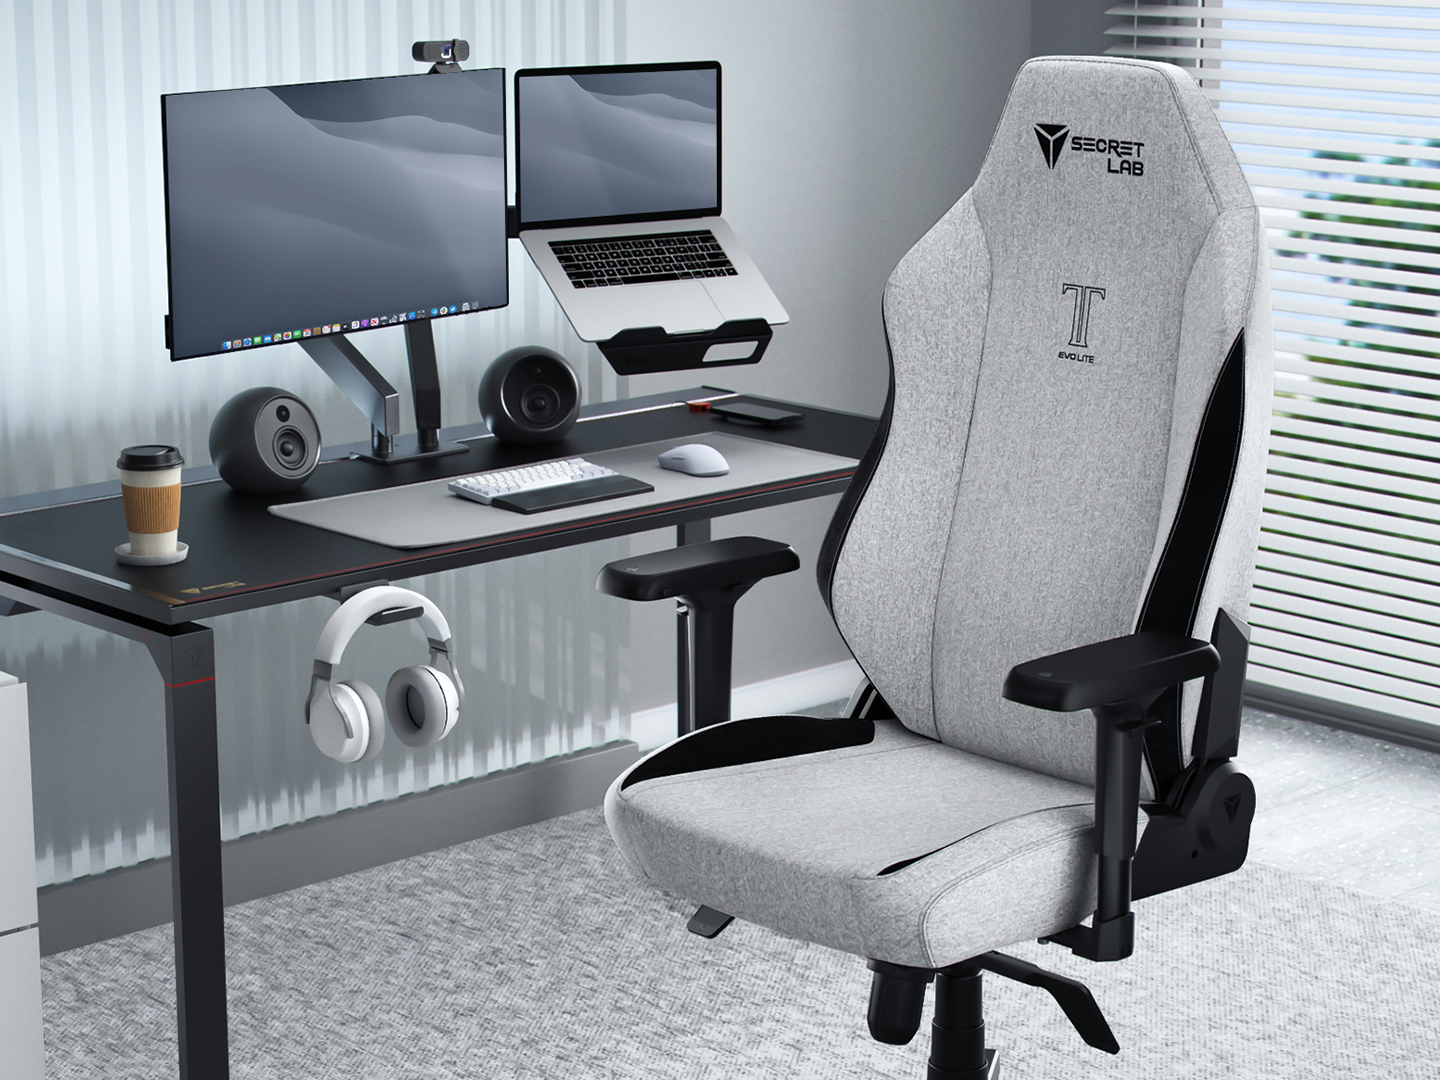 Secretlab's New Gaming Chair Is More Budget-Friendly, Still High